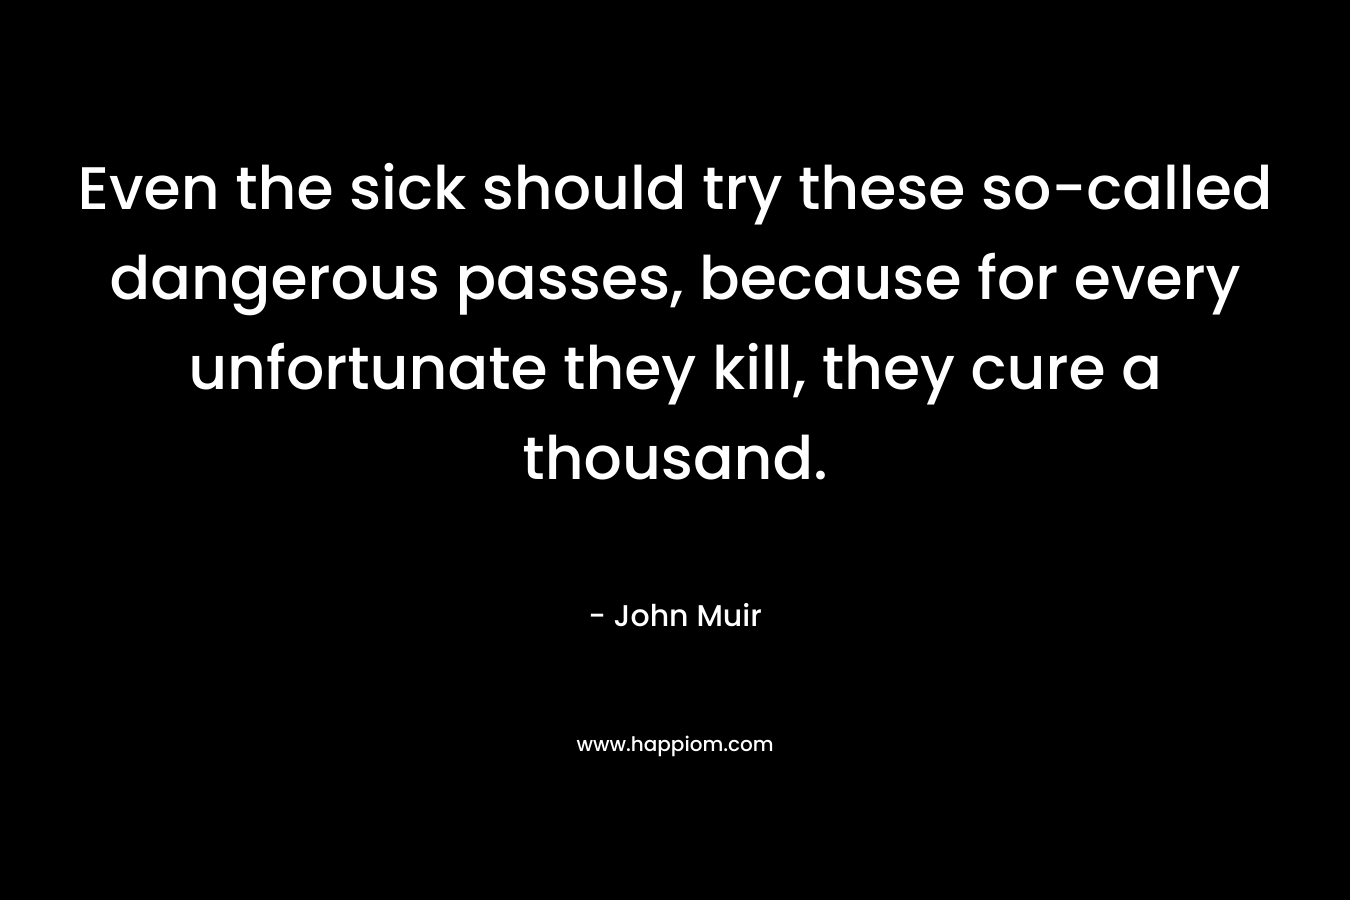 Even the sick should try these so-called dangerous passes, because for every unfortunate they kill, they cure a thousand. – John Muir